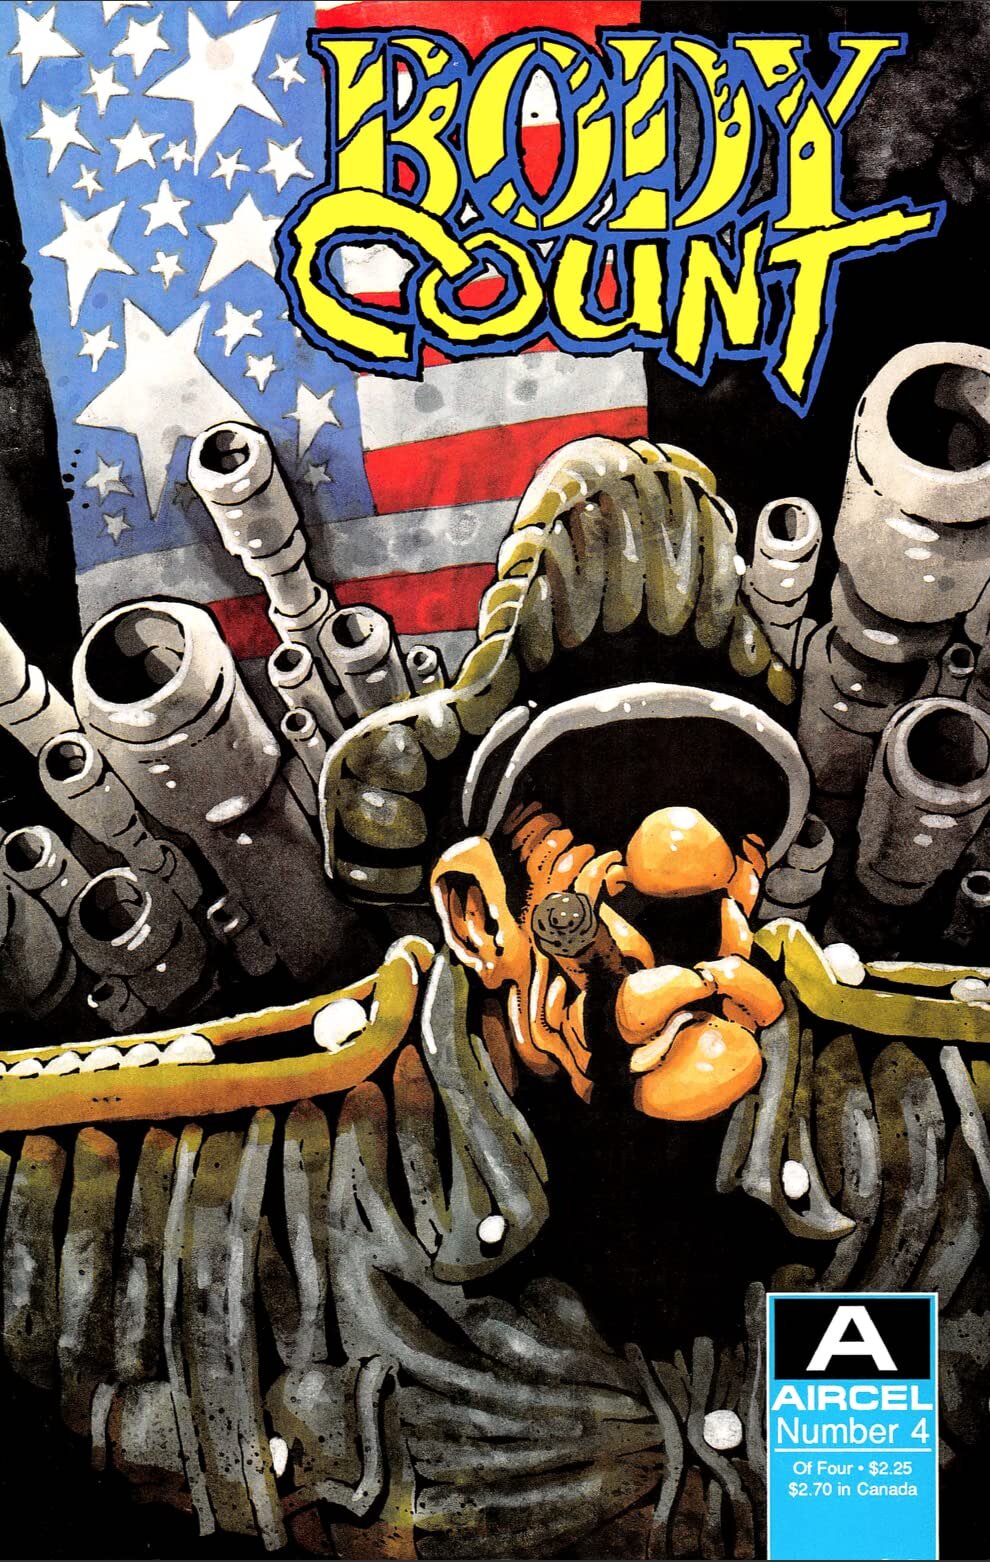 Body Count # 1 Dave Cooper Aircel Comics USA, 1989 of 4